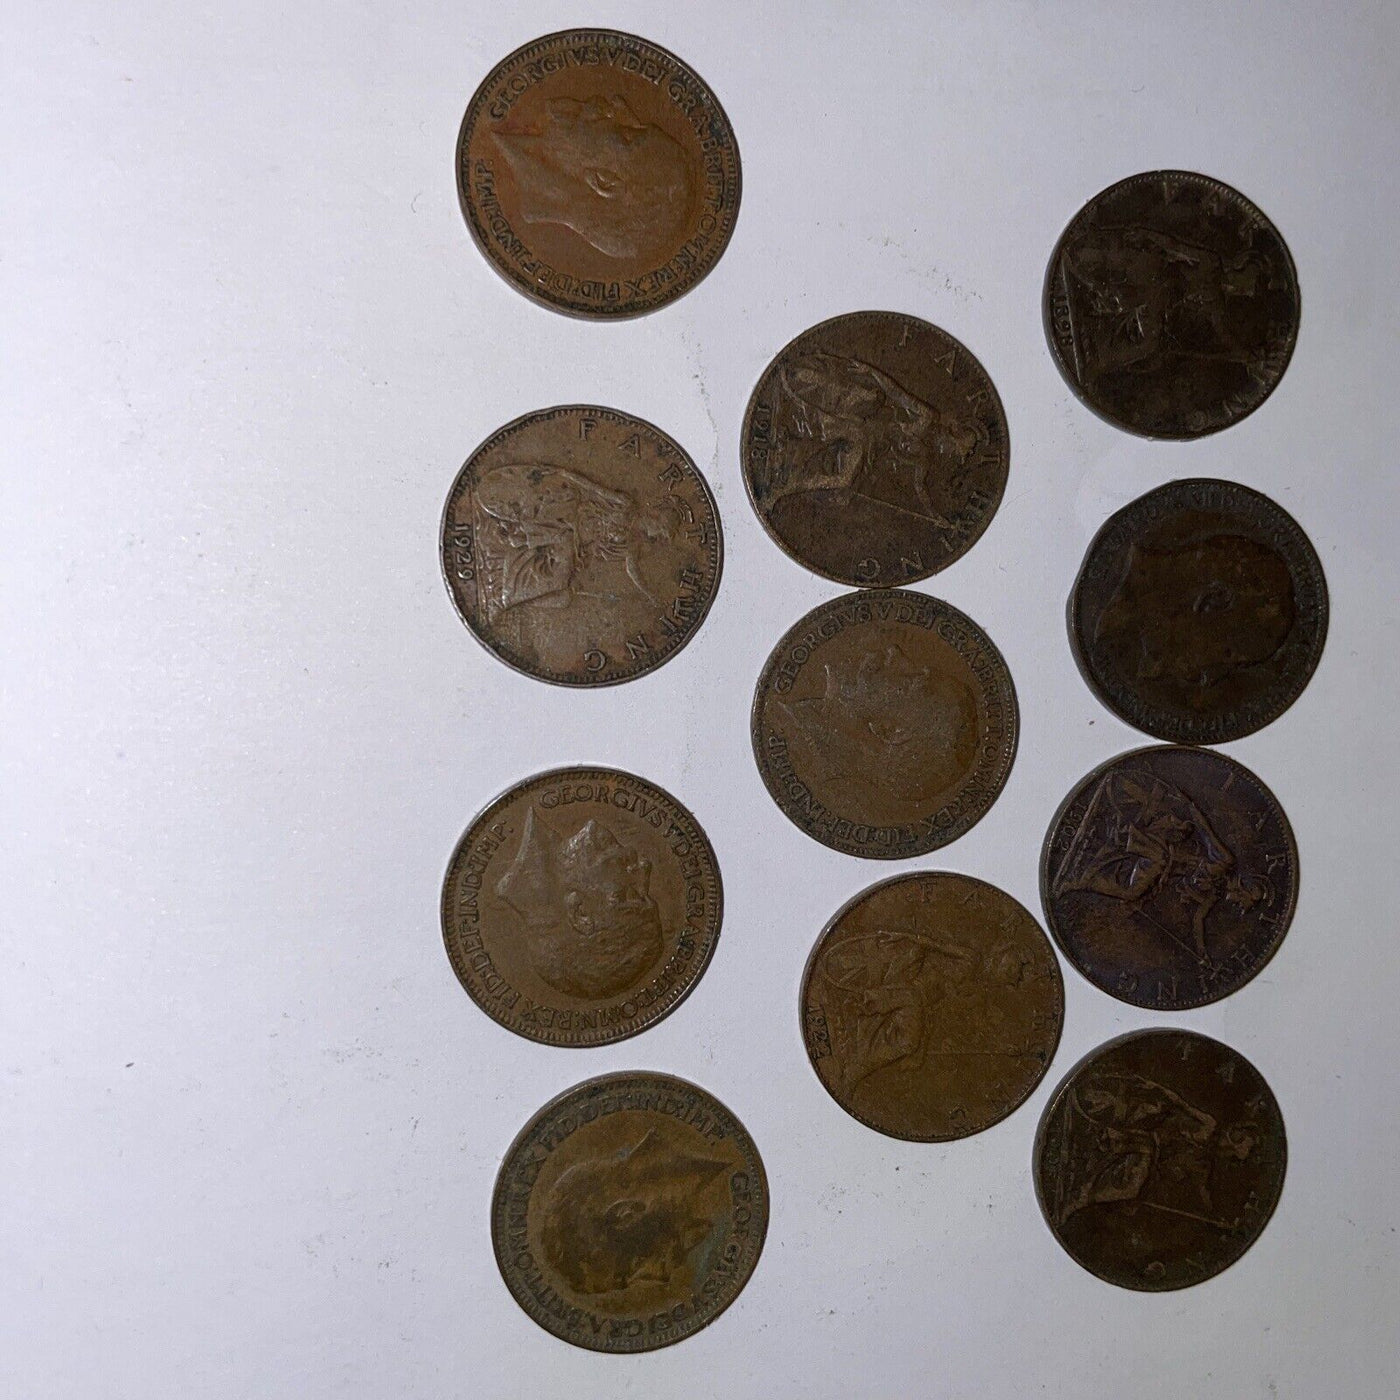 11 diff Fine English 1/4 Penny Farthing Coppers nice collection 1898 to 1936 - US CoinSpot